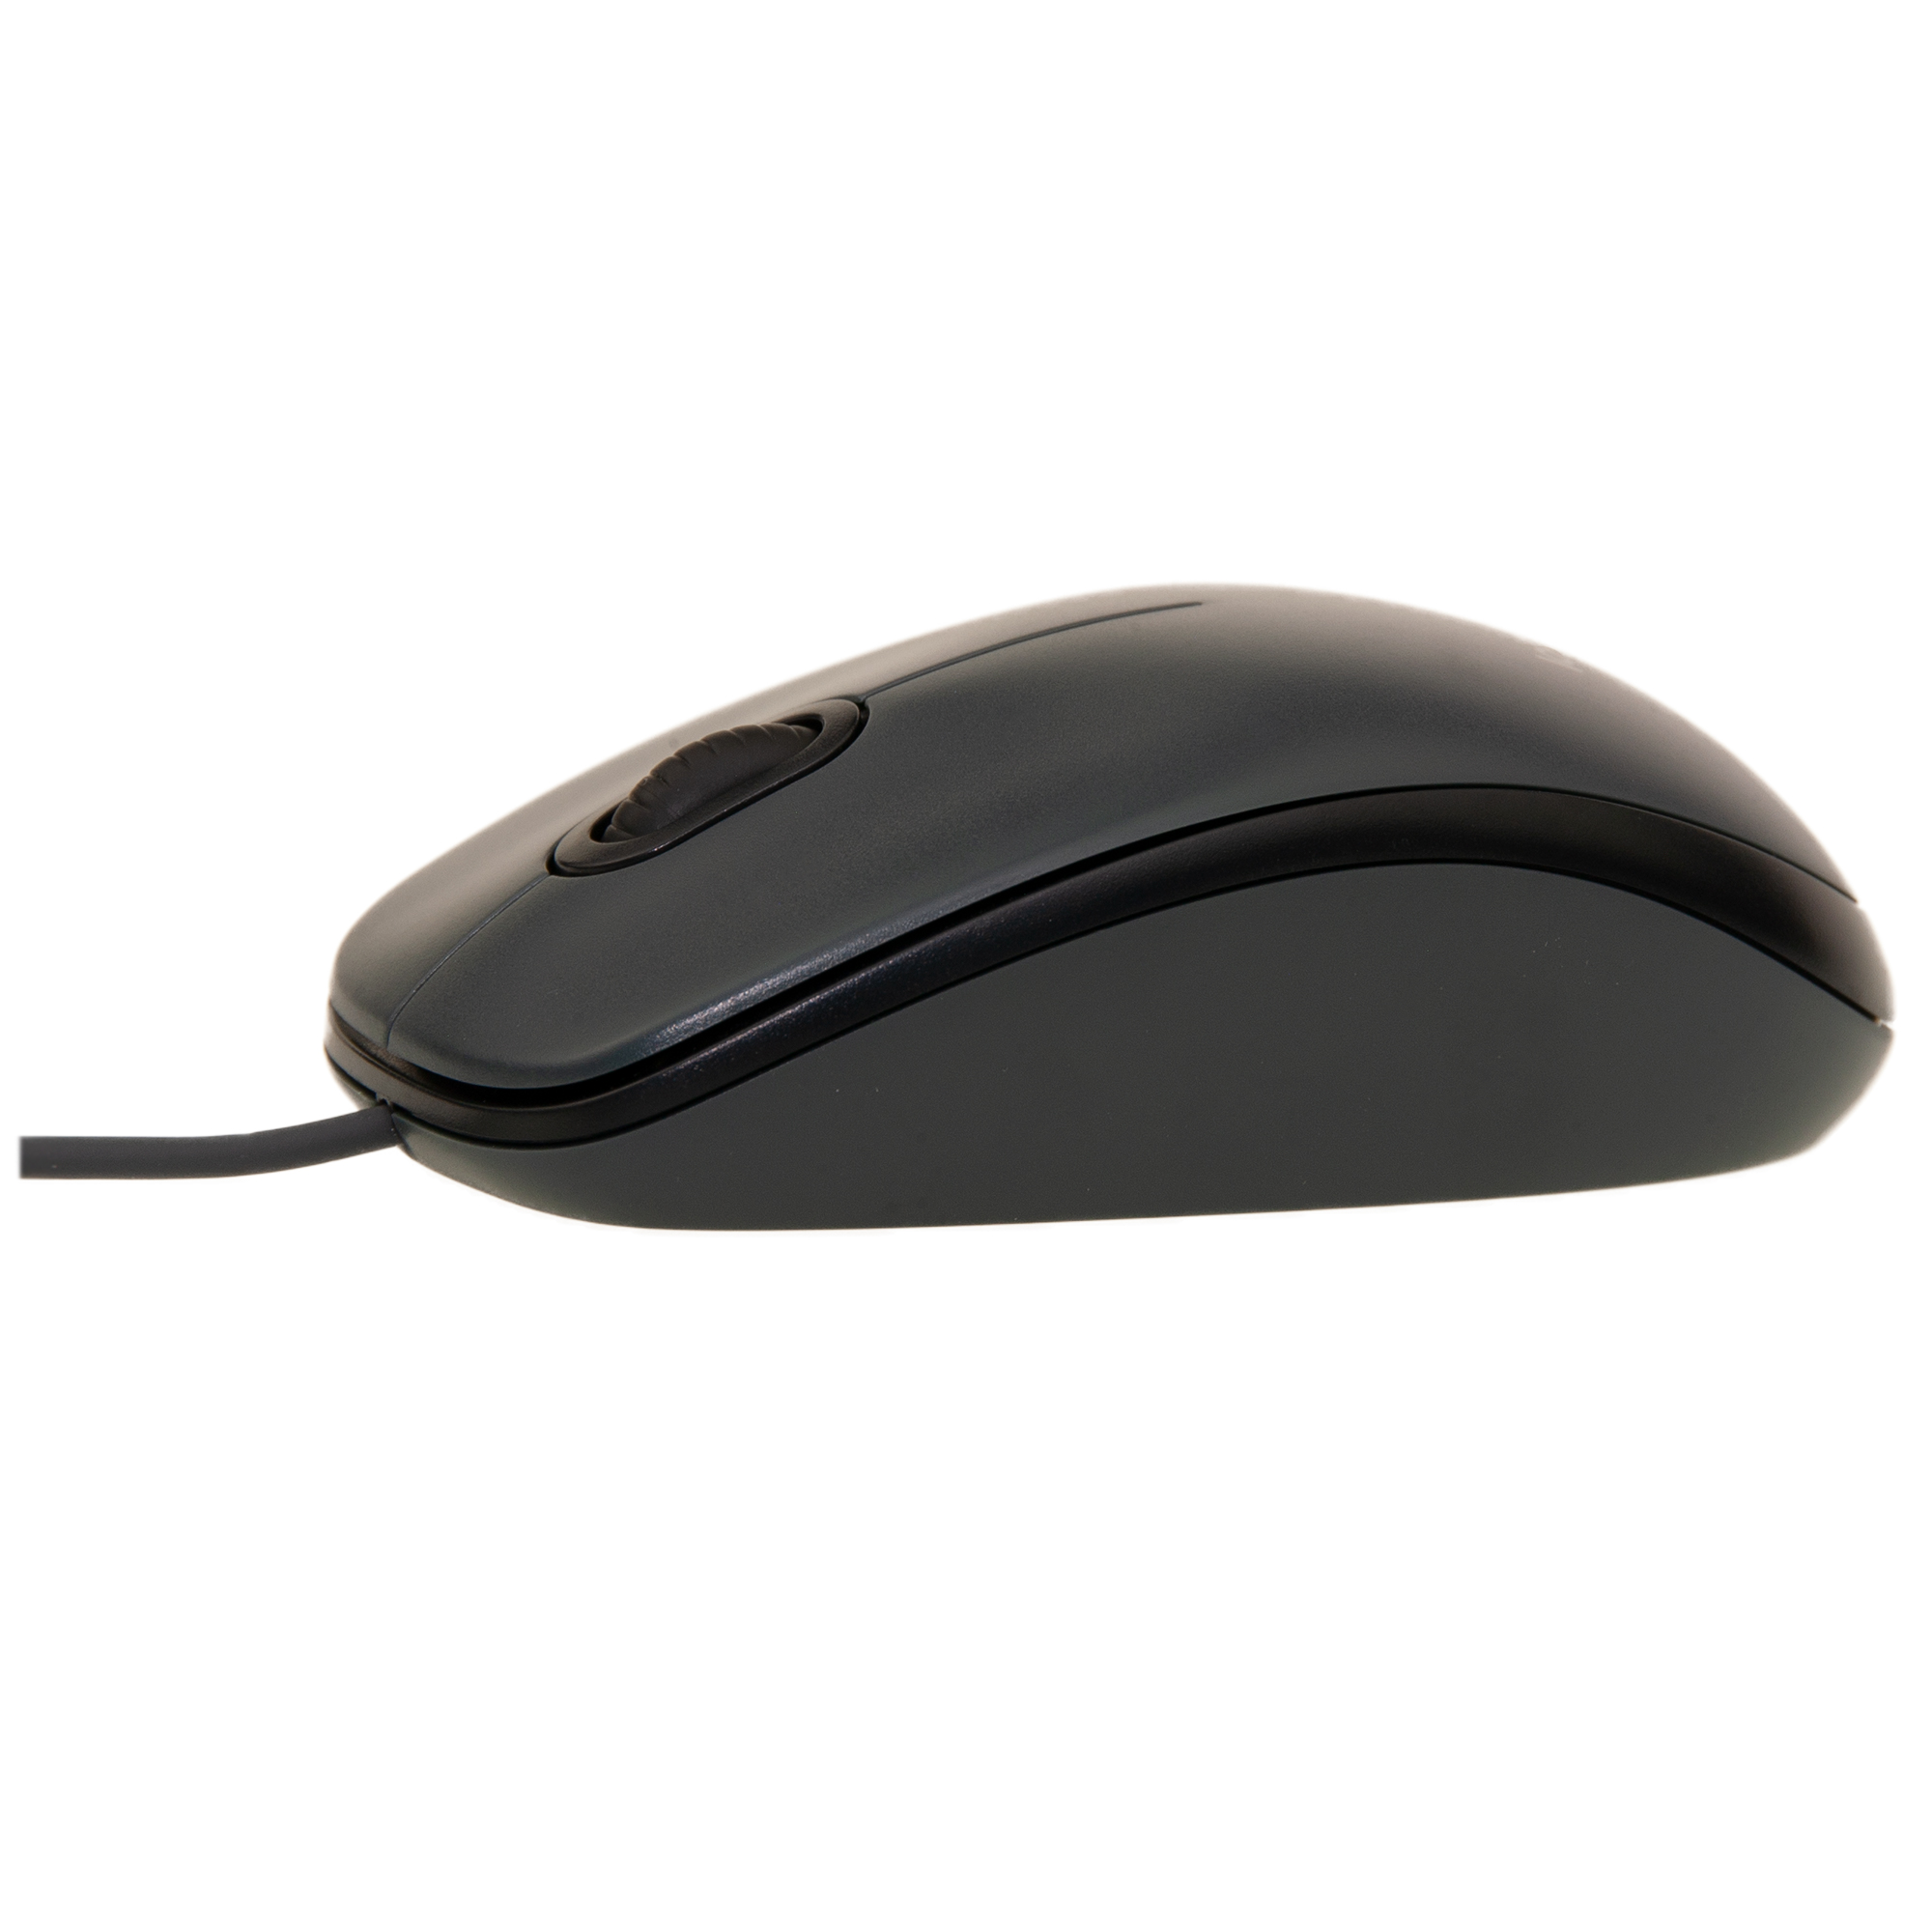 Serious residue greenhouse Logitech M100 USB Optical Wired Mouse, Black